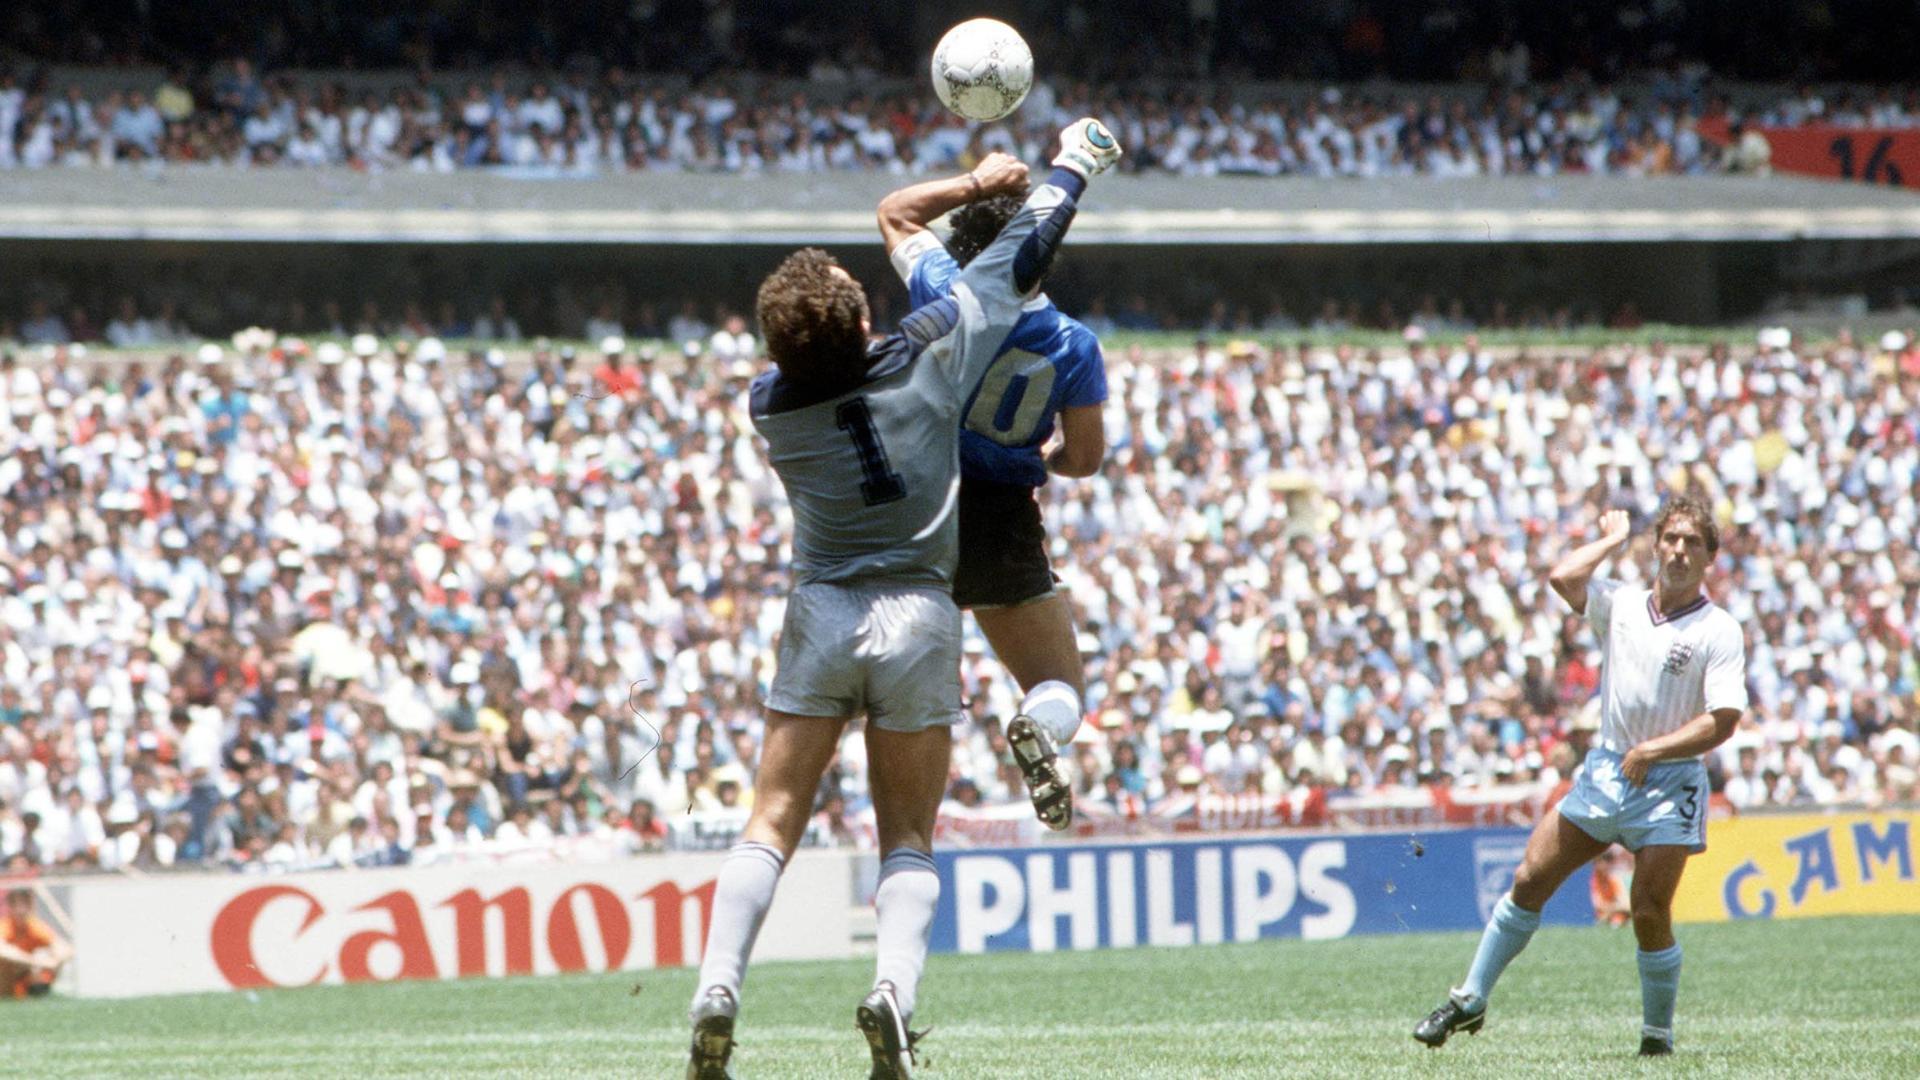 Download wallpaper goal, Maradona, The Hand Of God, The Hand of God, section sports in resolution 1920x1080